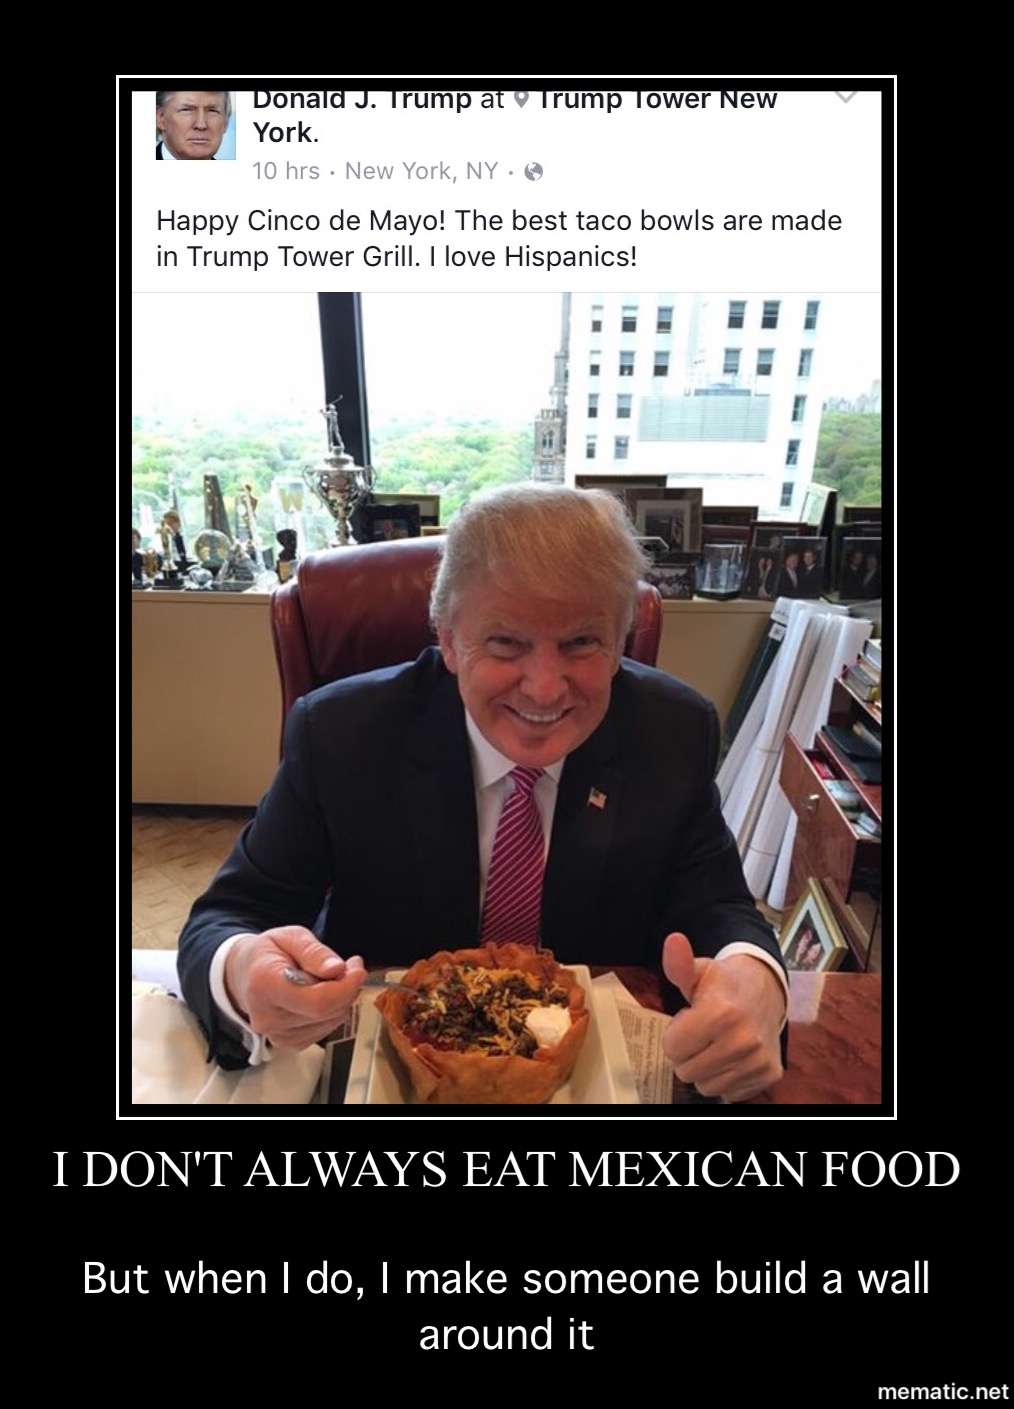 I don't always eat Mexican food...